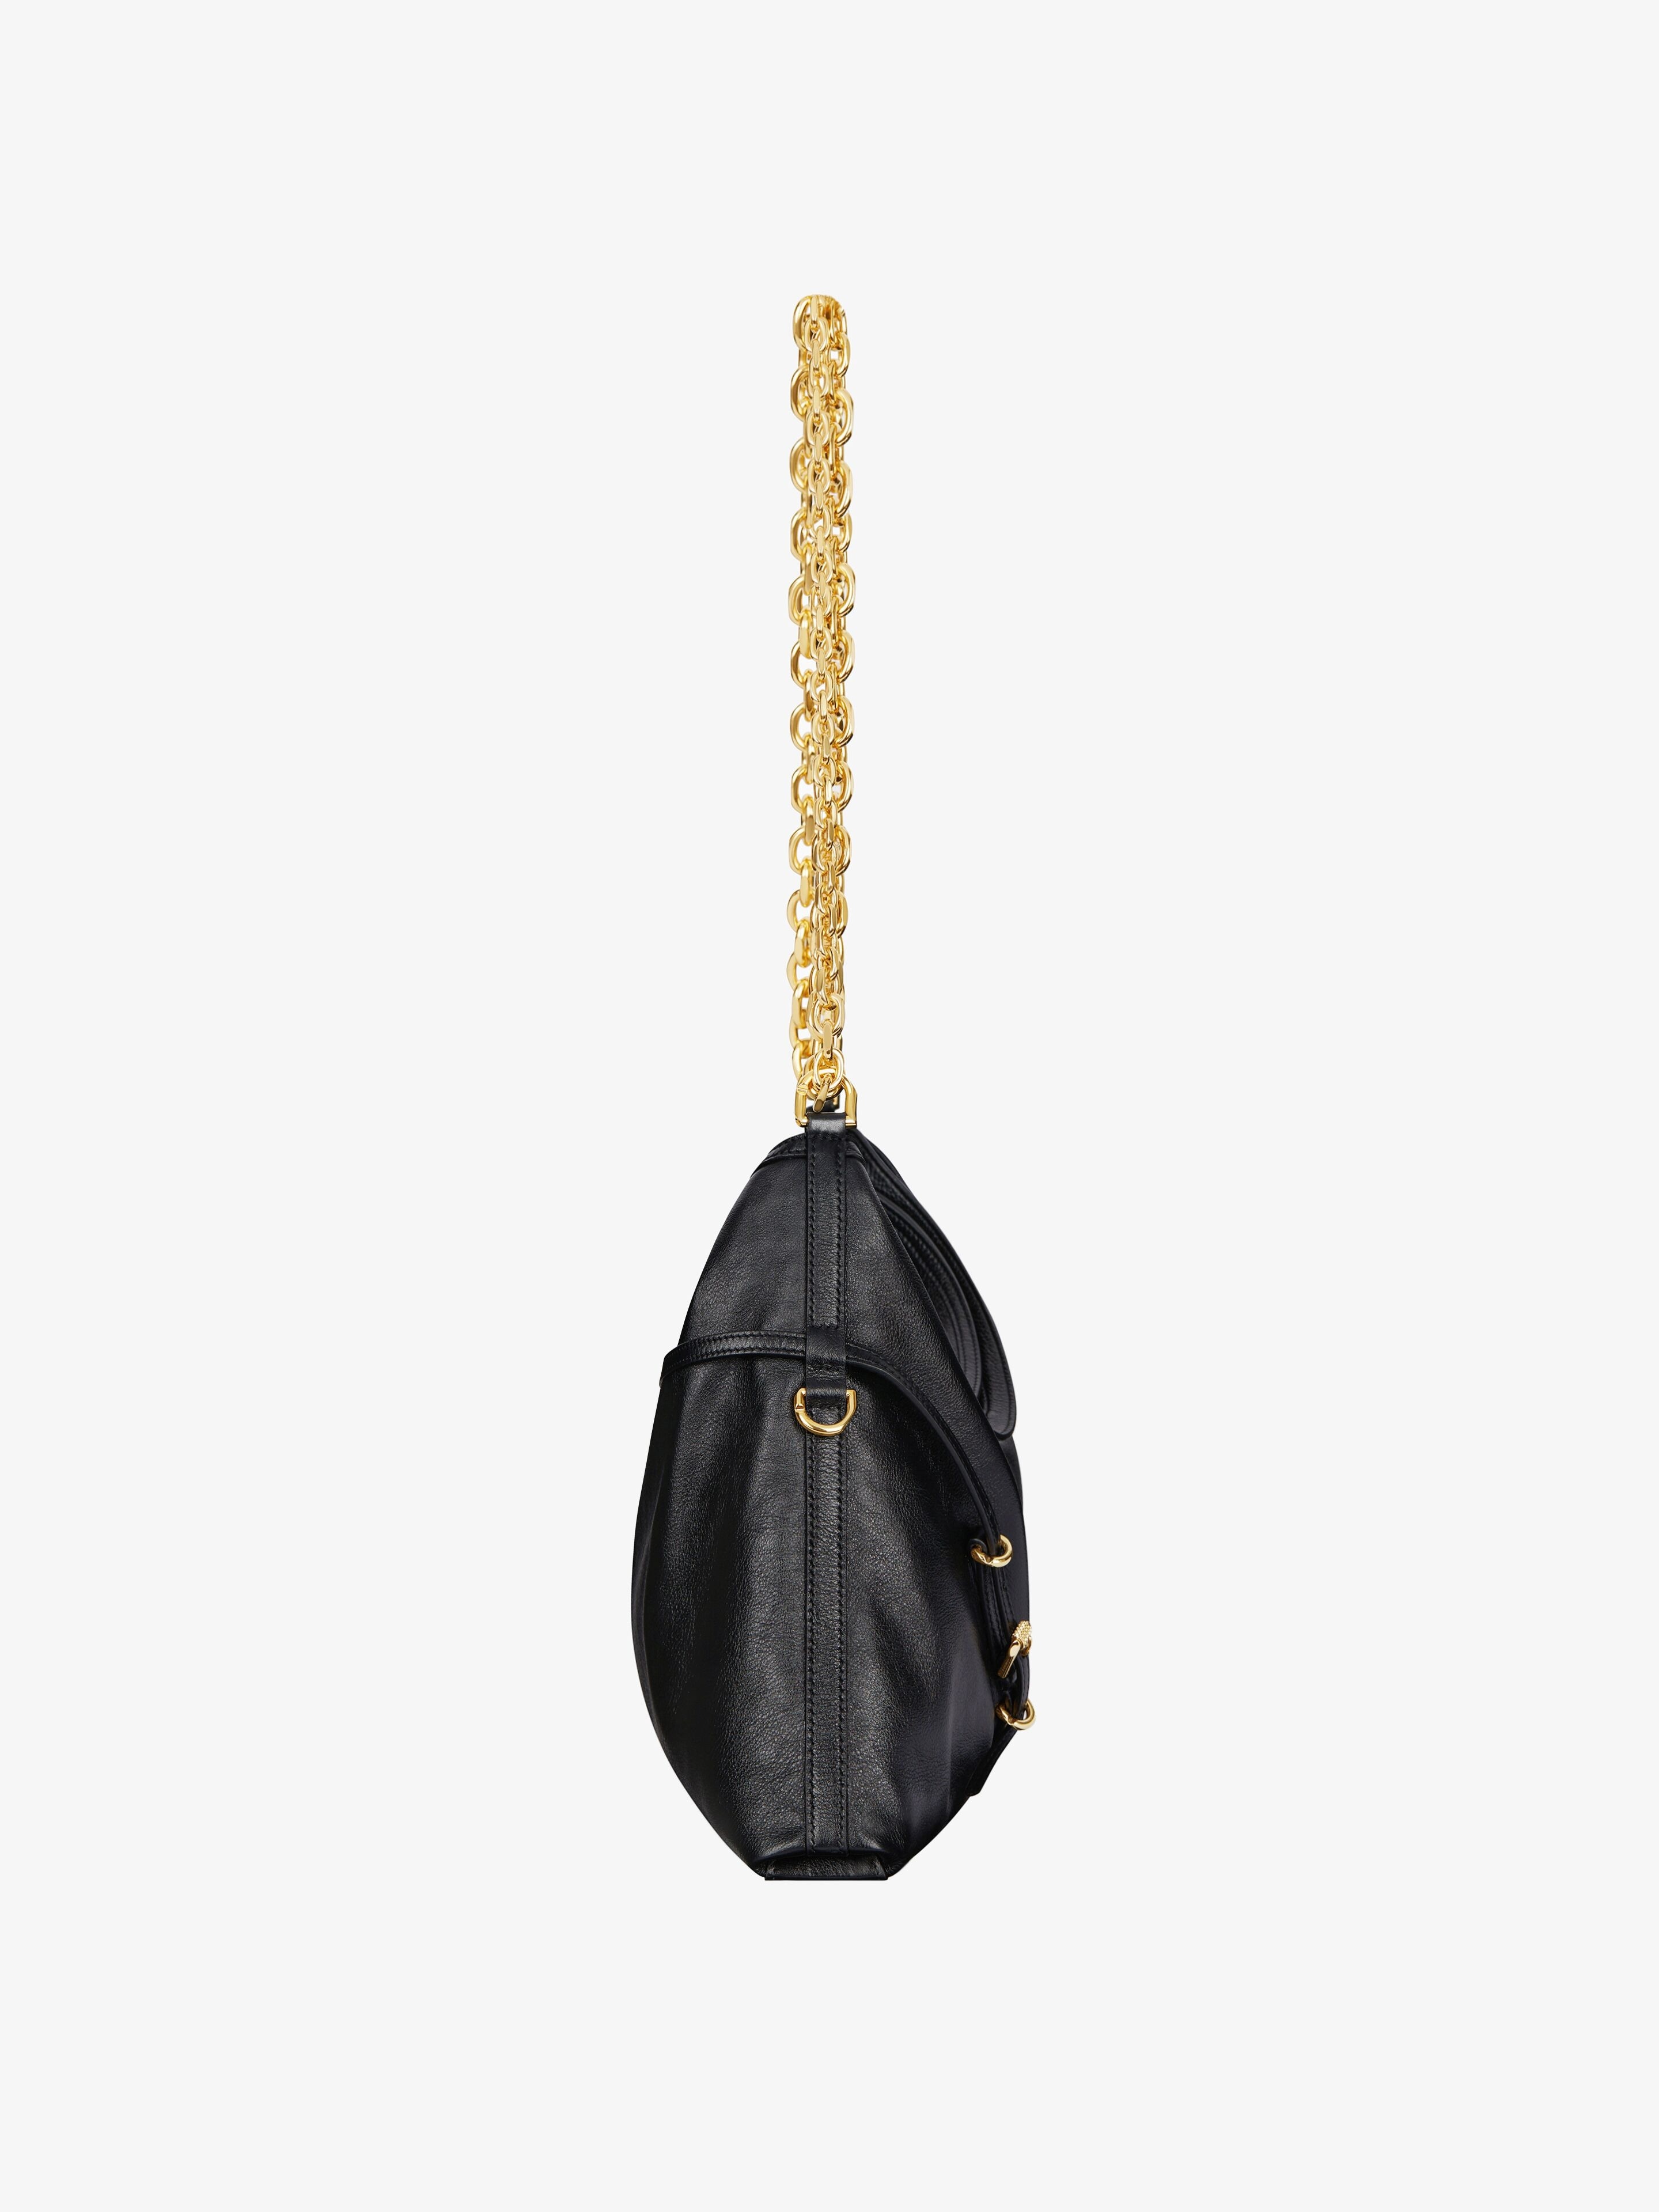 MEDIUM VOYOU CHAIN BAG IN LEATHER - 3